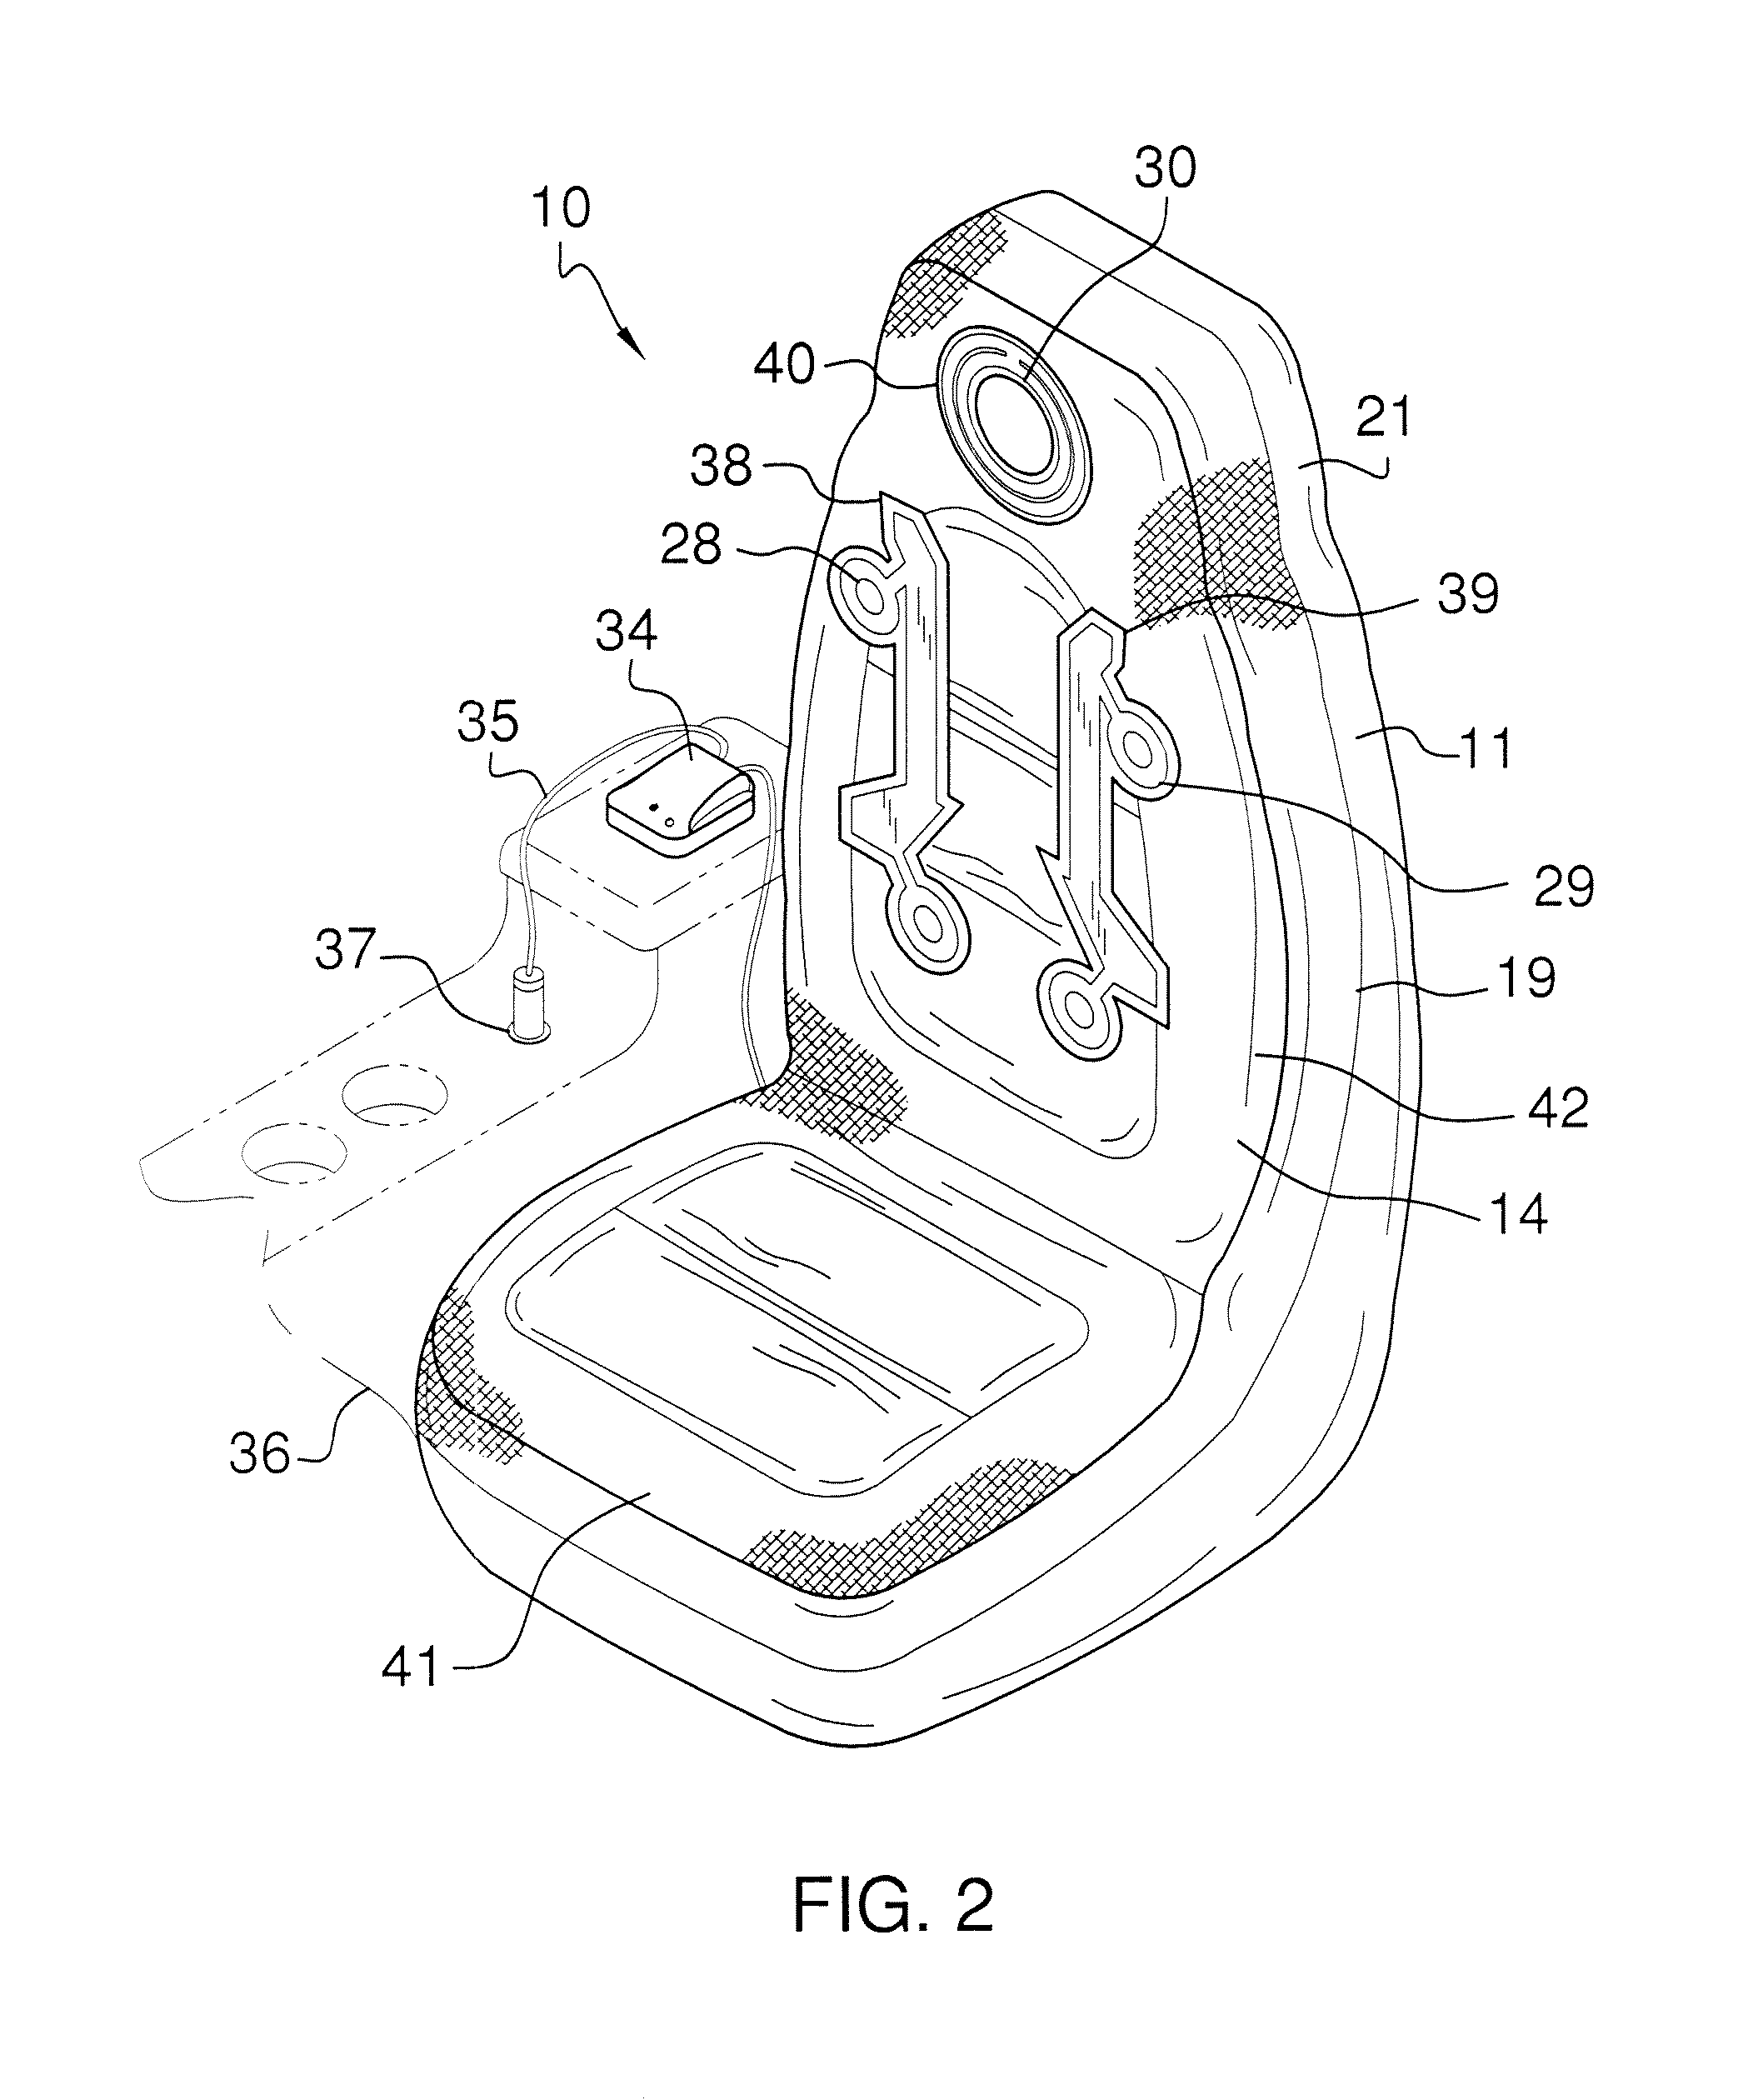 Illuminated circuit print seat cover assembly